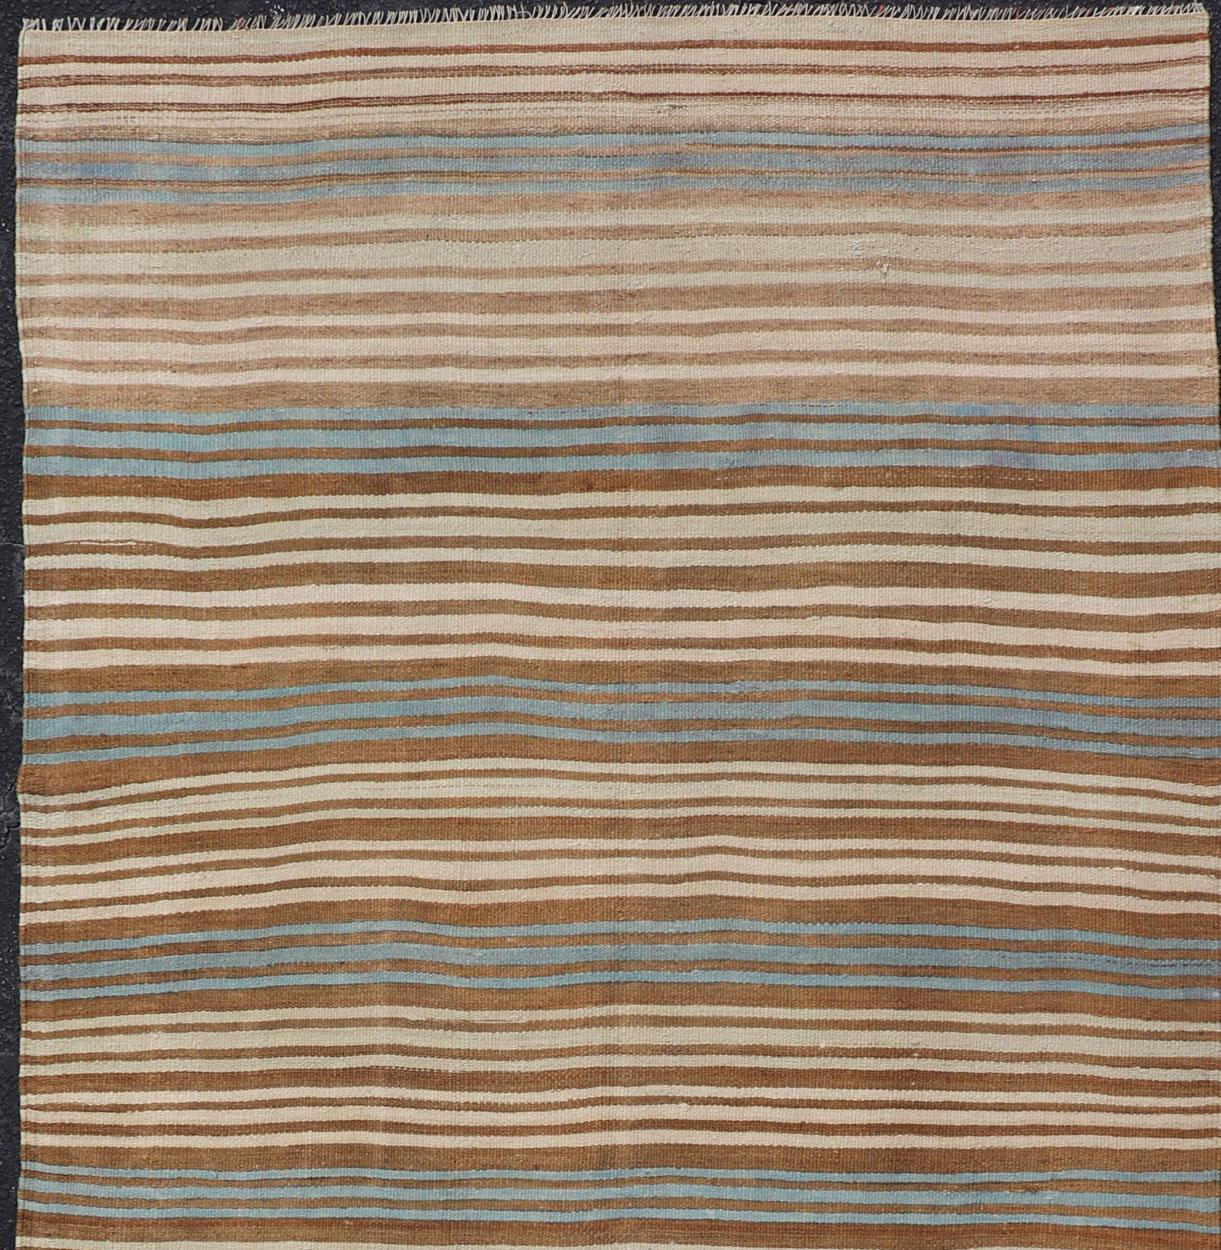 Wool Vintage Hand Woven Turkish Kilim with Stripes in Brown, Cream and Light Blue For Sale